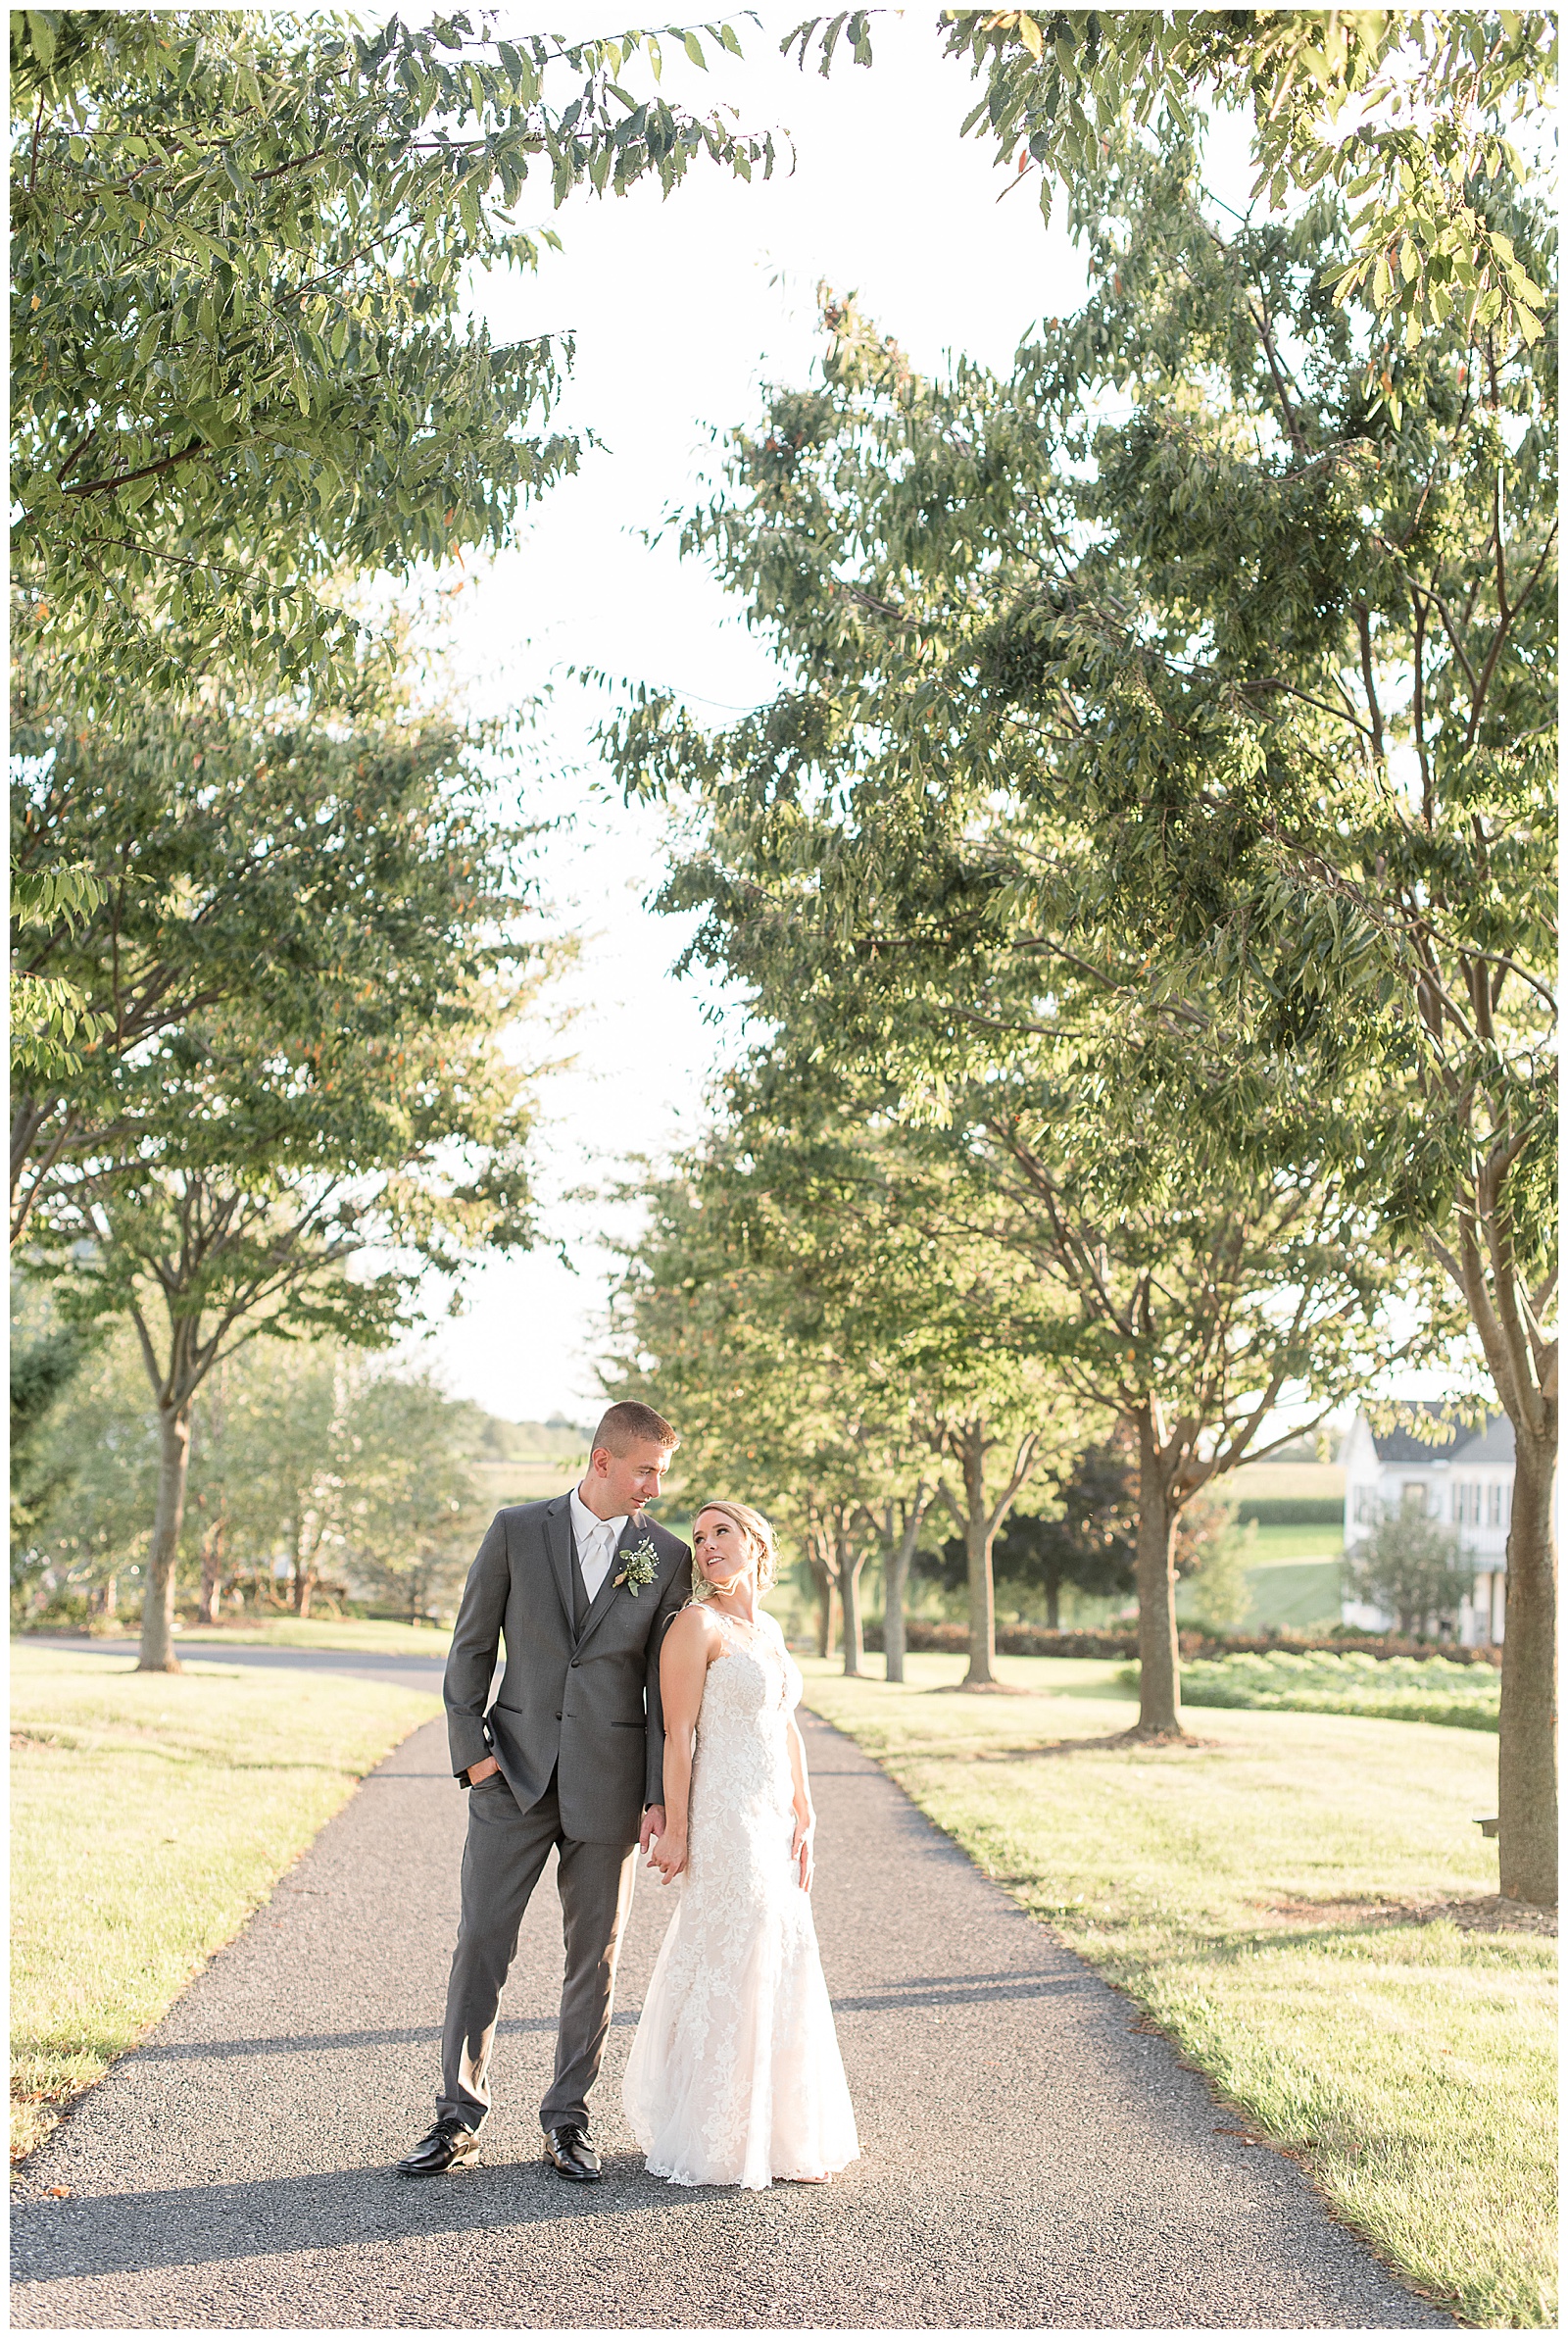 the couple is standing on a paved tree-lined pathway outdoors on a sunny day with the groom on the left with his right hand in his pocket and leaning towards the bride on the right whose back is slightly towards him while she looks up at him and they both are smiling at Lakefield Weddings in Manheim, PA